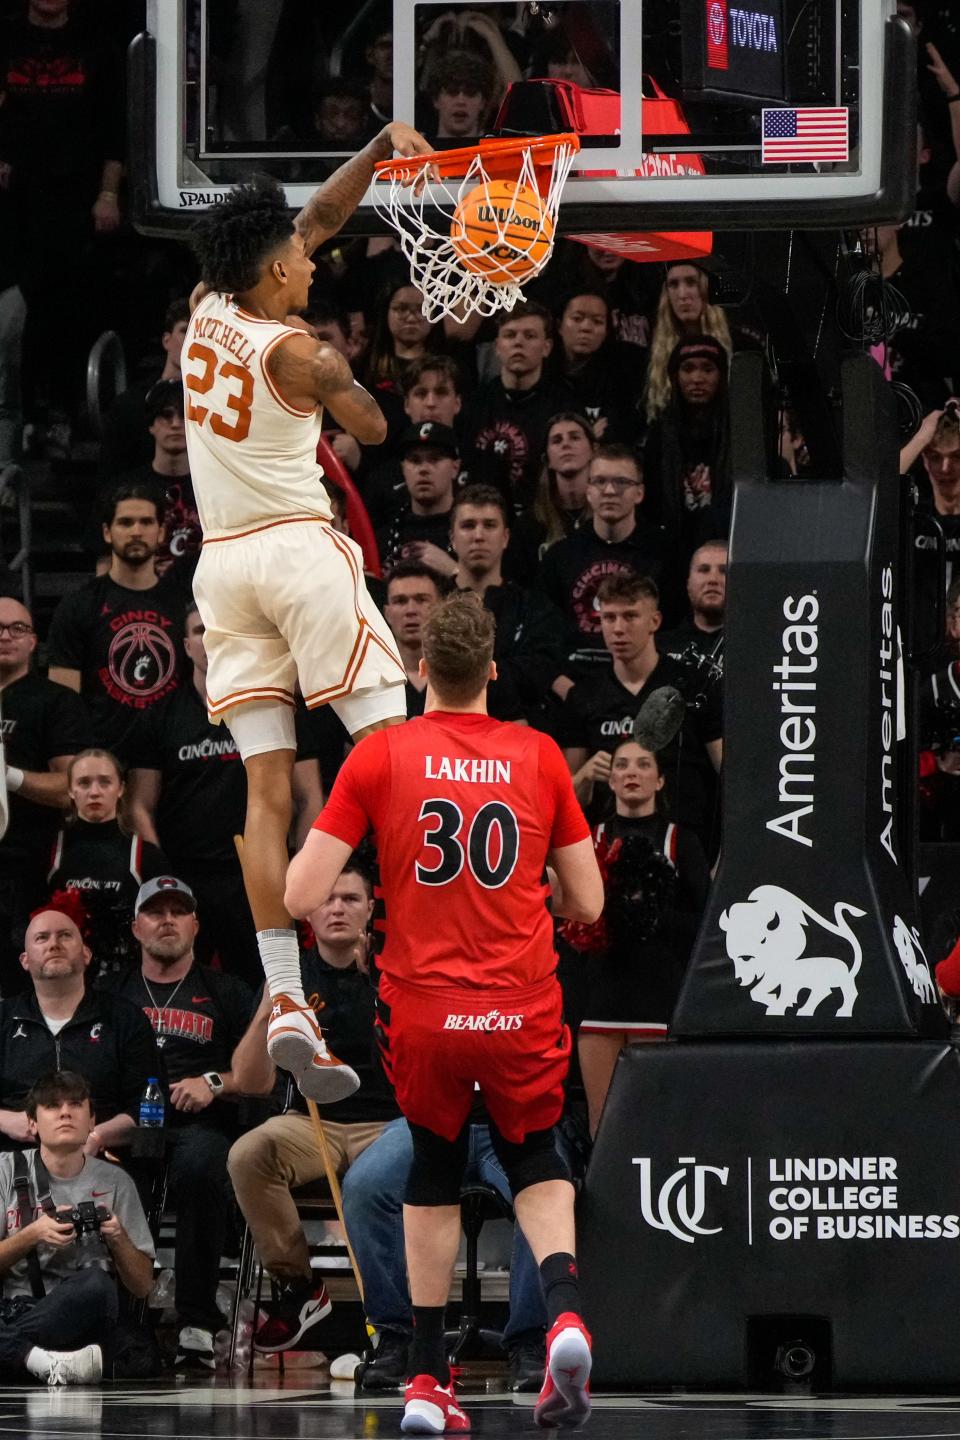 Texas Longhorns forward Dillon Mitchell (23) breaks away to dunk the ball in the second half  of their game with the Bearcats Jan. 9. Texas won 74-73 on a jumper by Max Abmas in the final seconds.